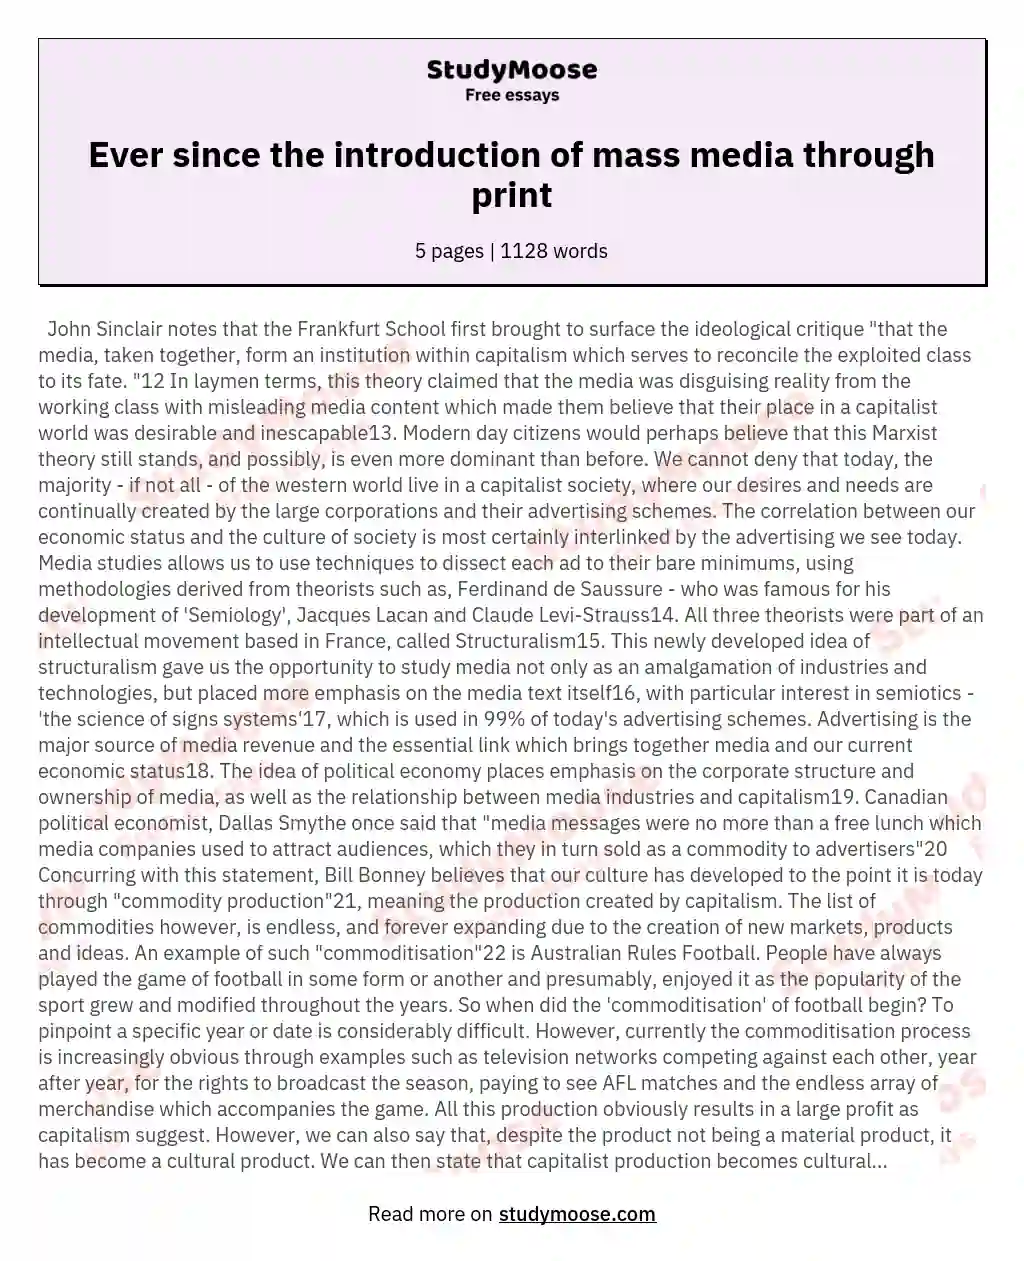 Ever since the introduction of mass media through print